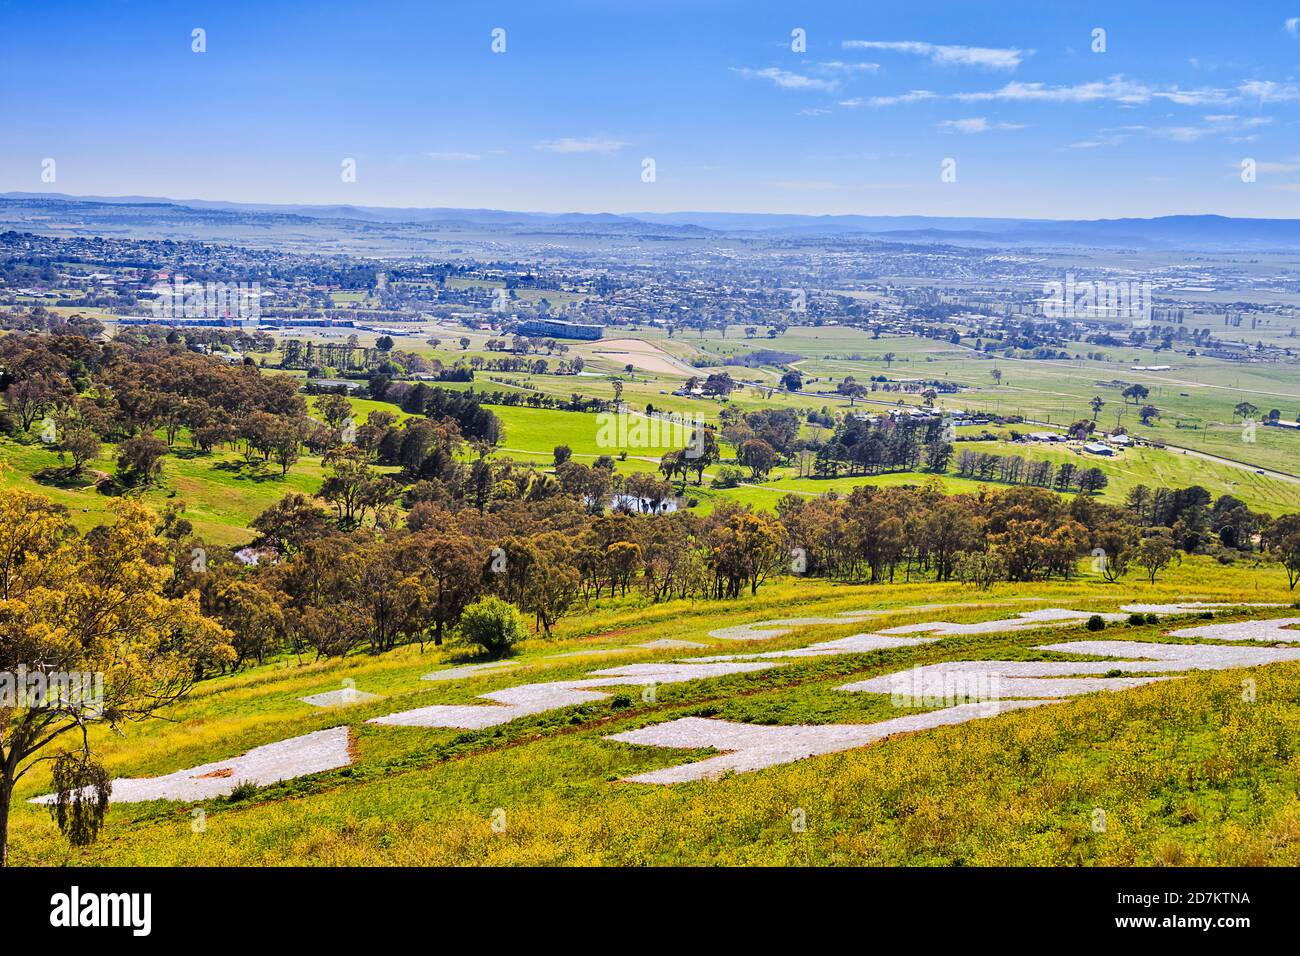 Mt Panorama motorsport racing circle above Bathurst city in a scenic valley between hill ranges on a sunny day. Stock Photo